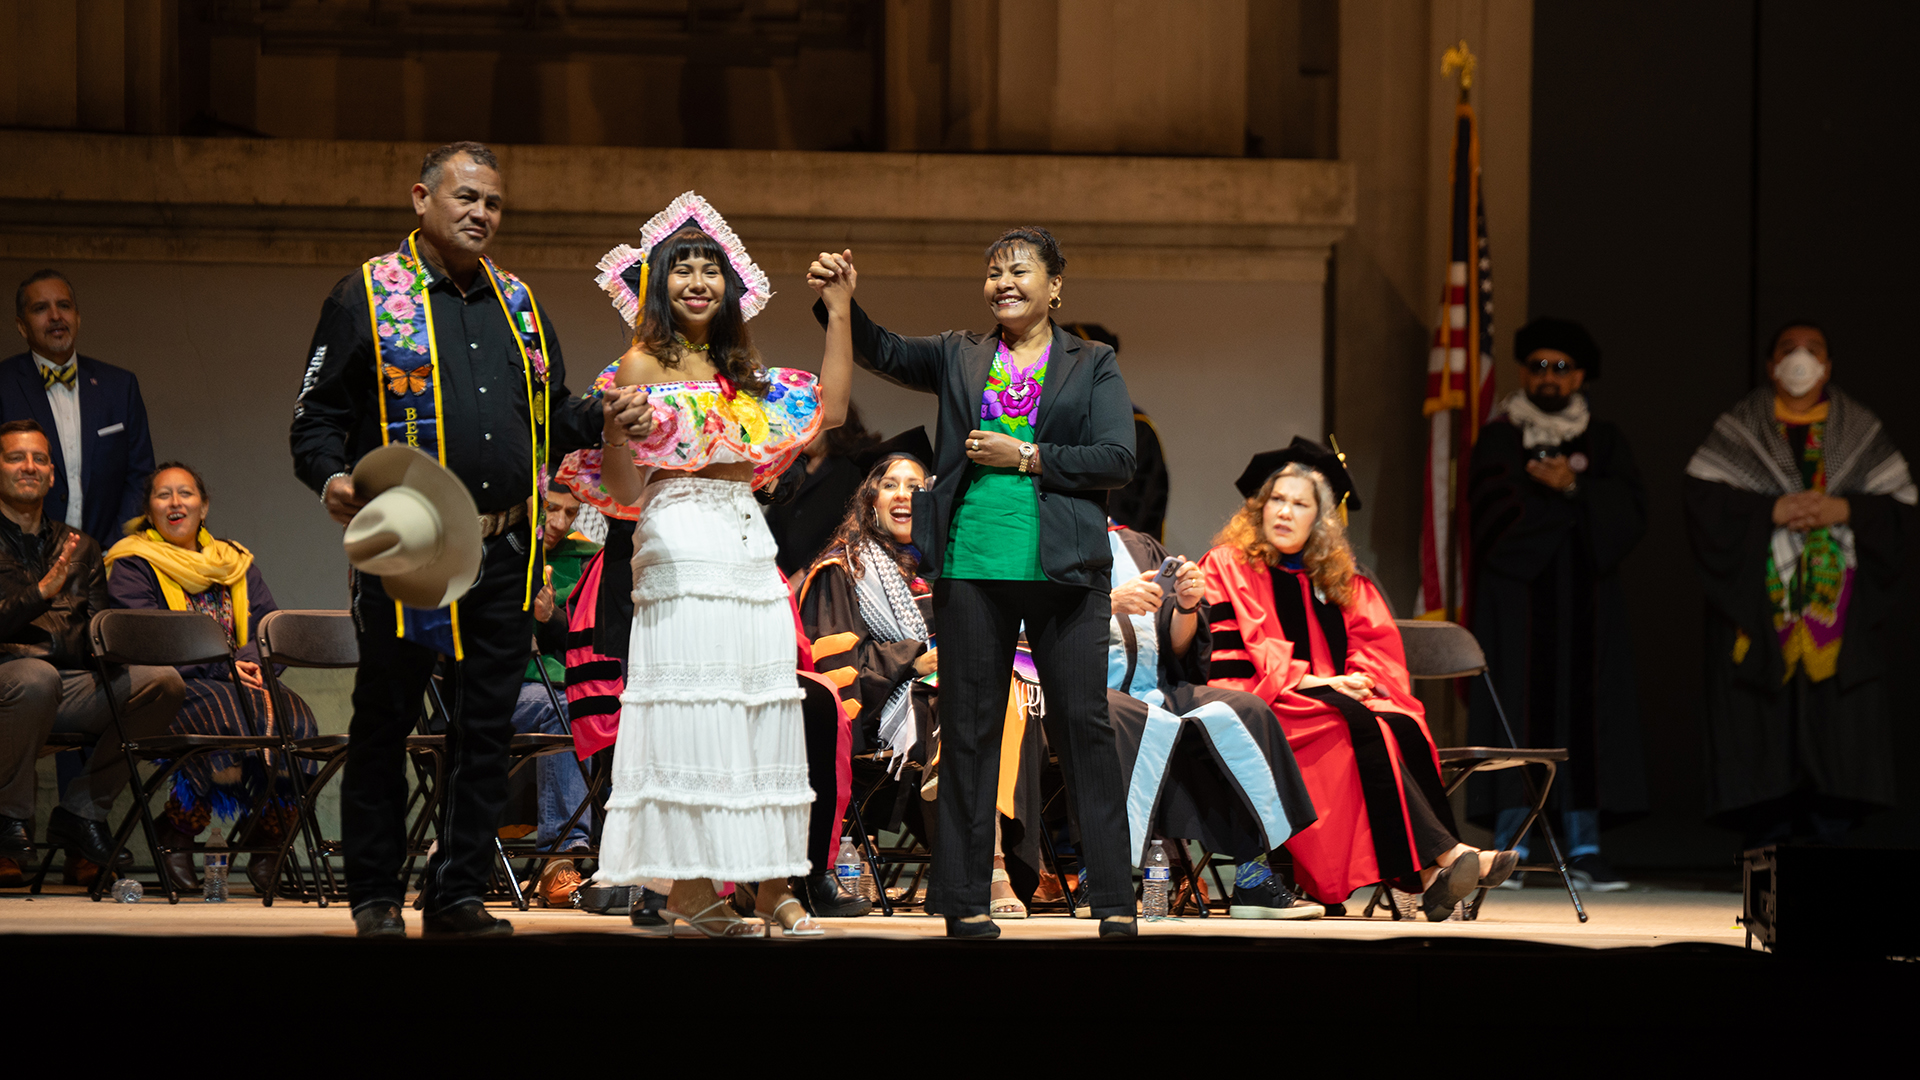 A graduating student stands on stage smiling and holding hands with her parents